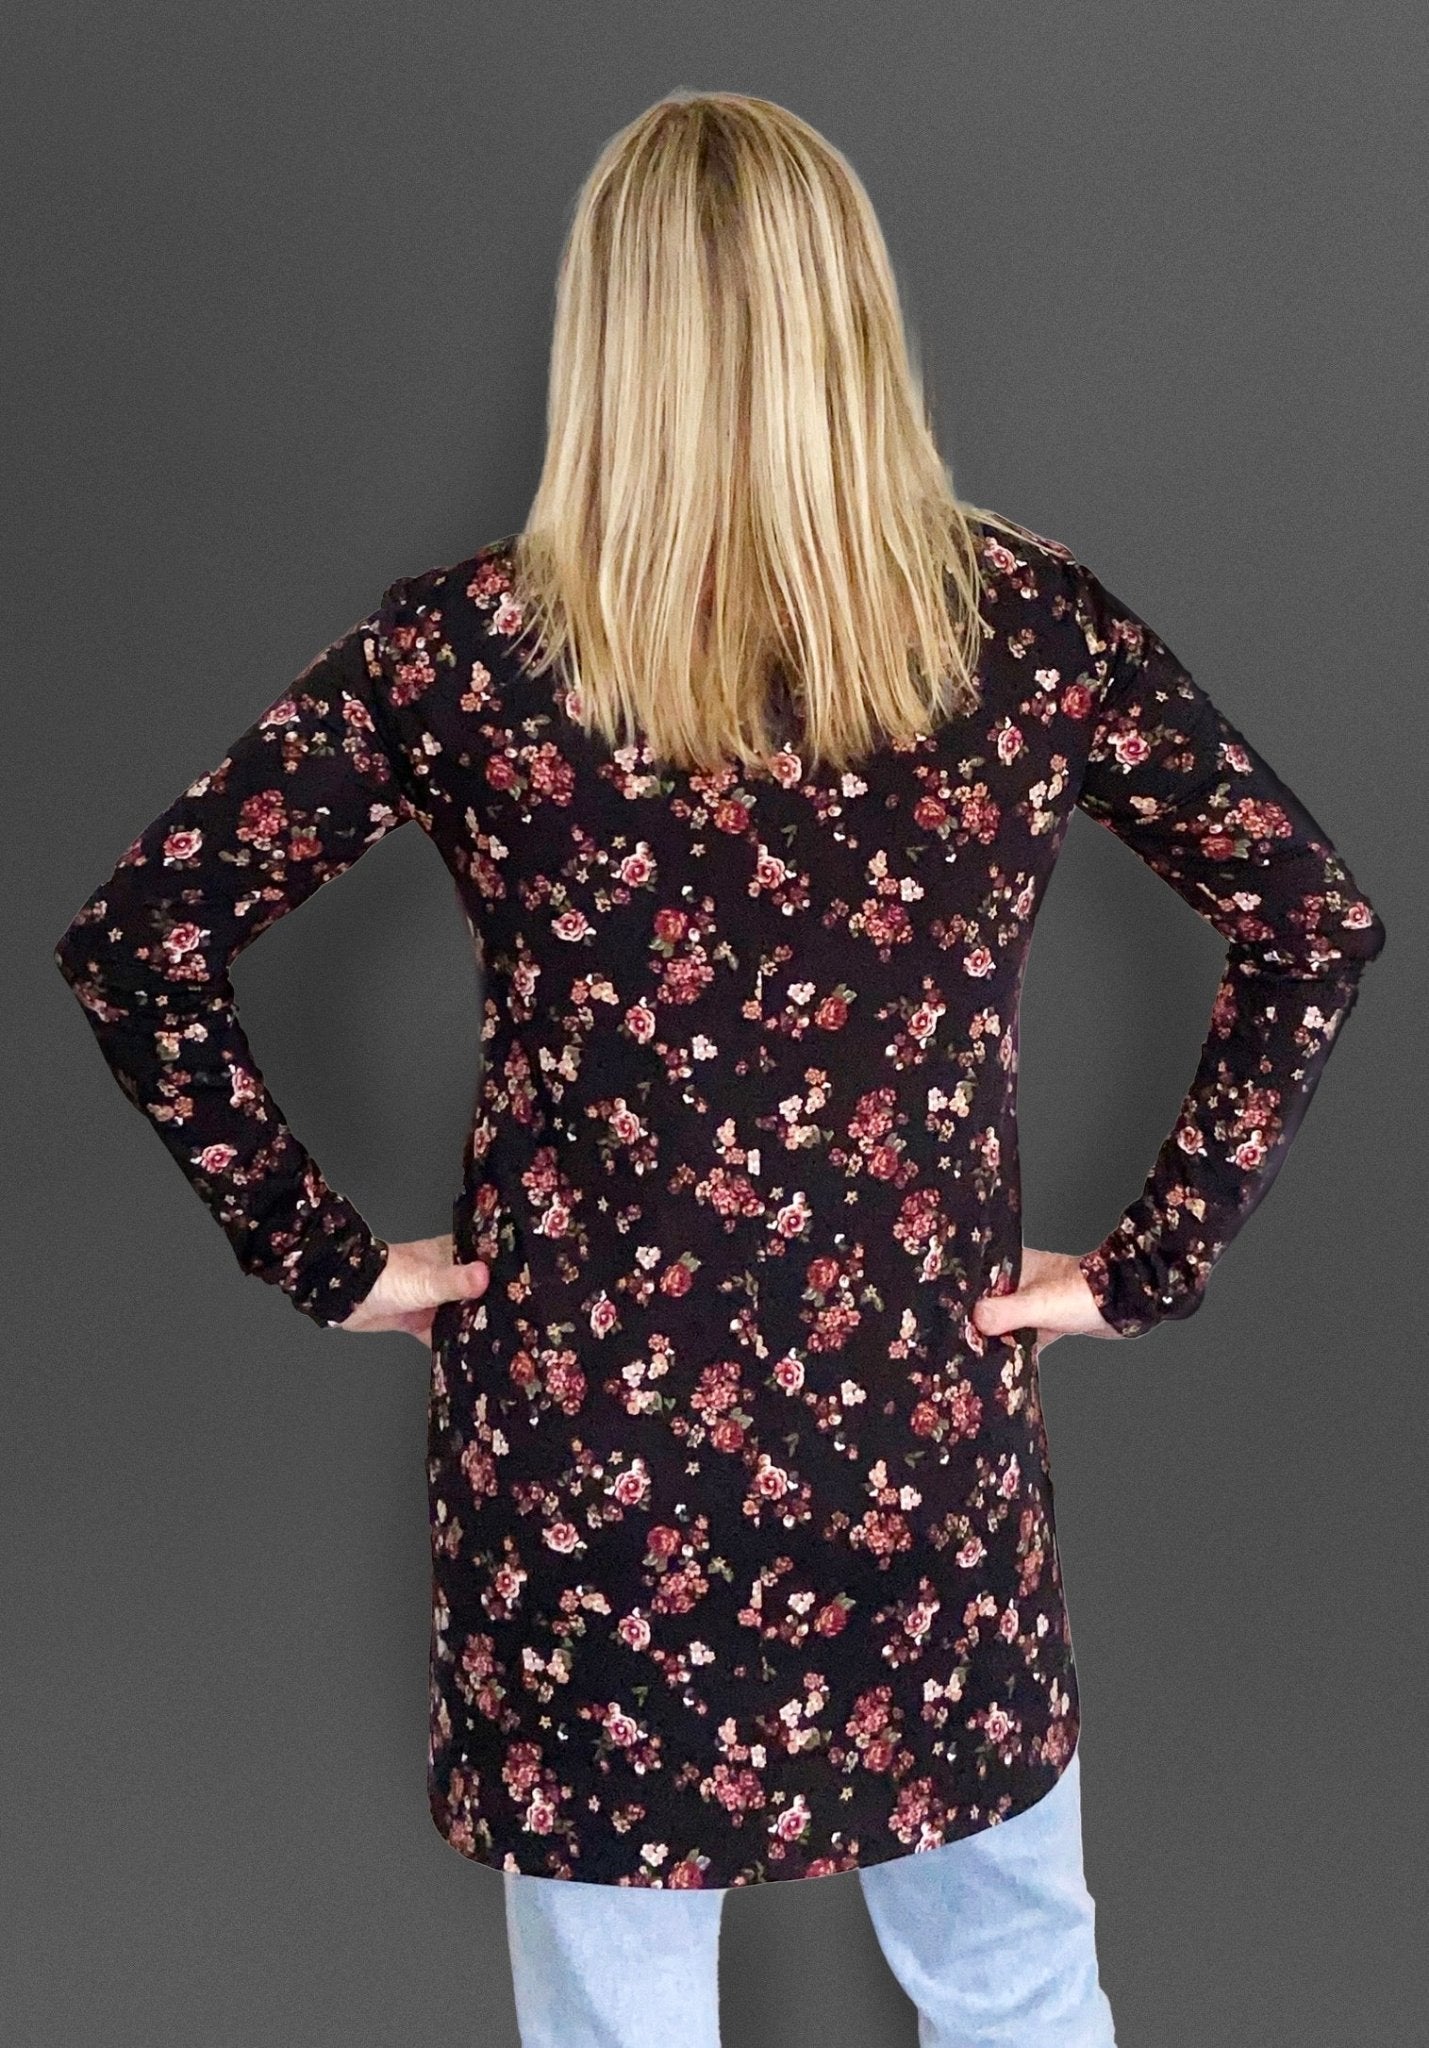 Coming Up Roses Tunic by Dotty, Roses Print, back view, extra long sleeves, split V-neck, matte jersey, banded hi-low hem with side splits, sizes S to XL, made in Toronto